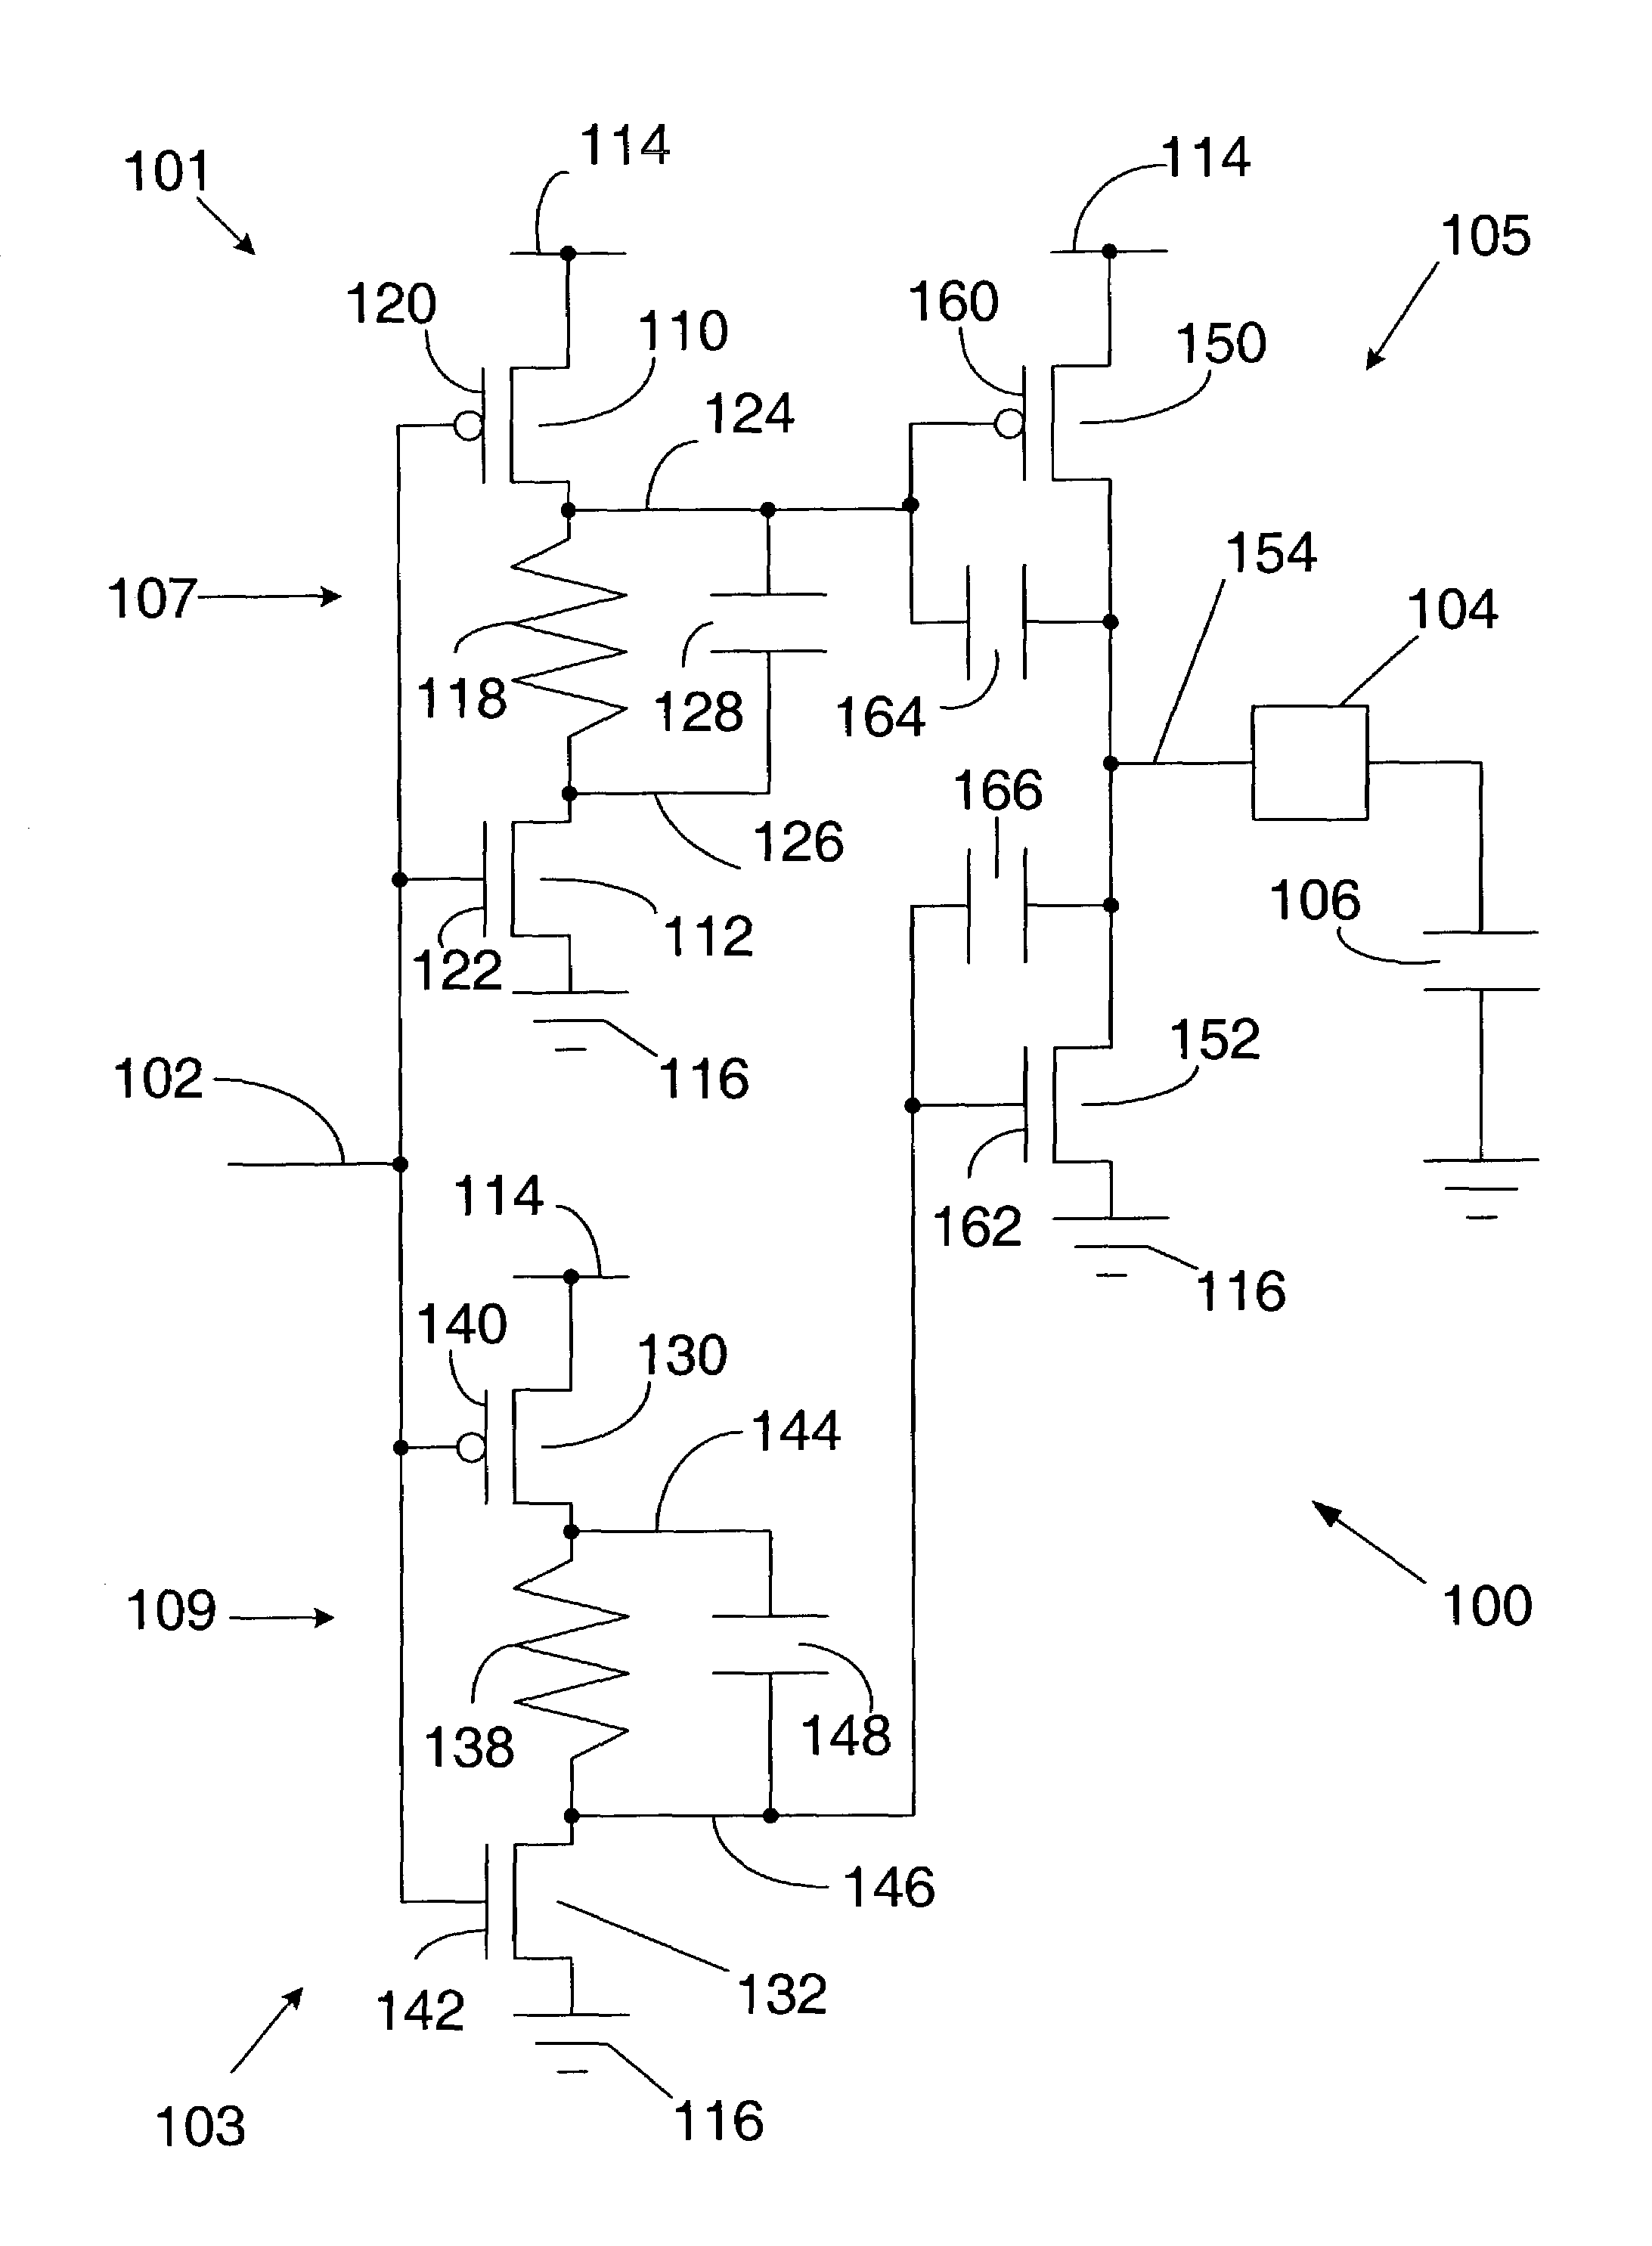 Output buffer with slew rate control and a selection circuit